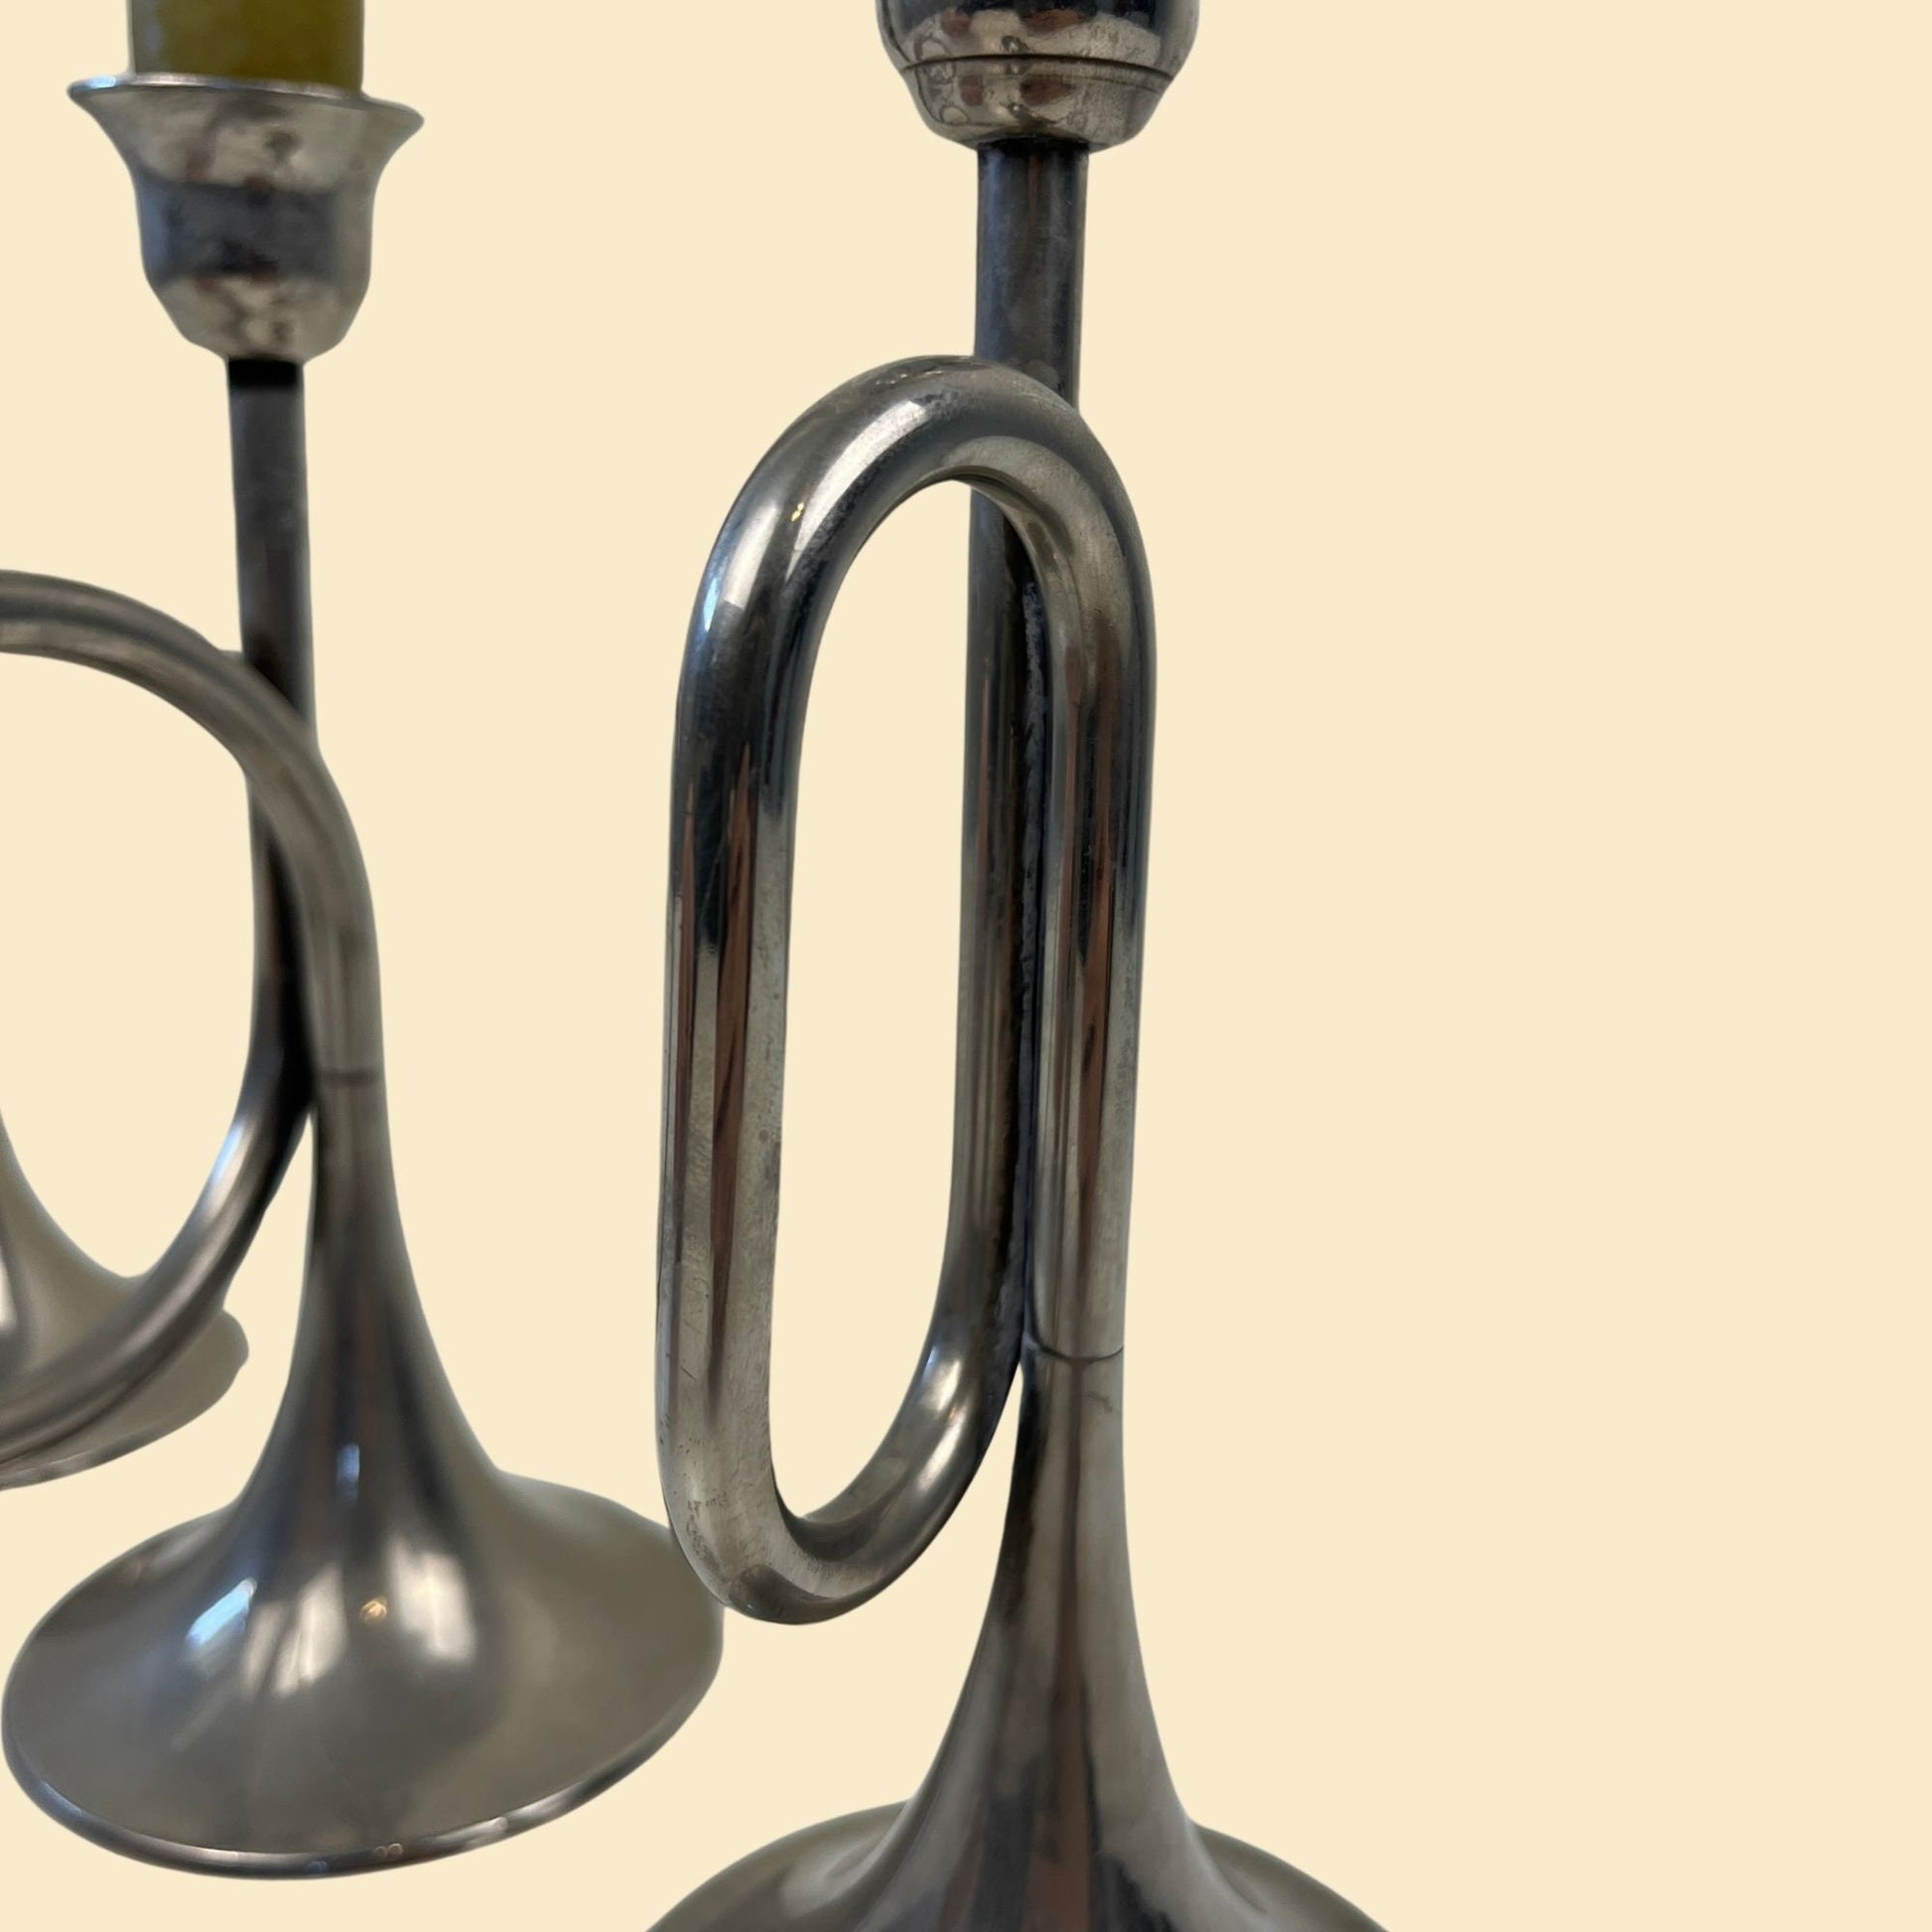 Set of 1980s instrument candlestick holders, vintage silver plated trumpet and bugle taper candle holders